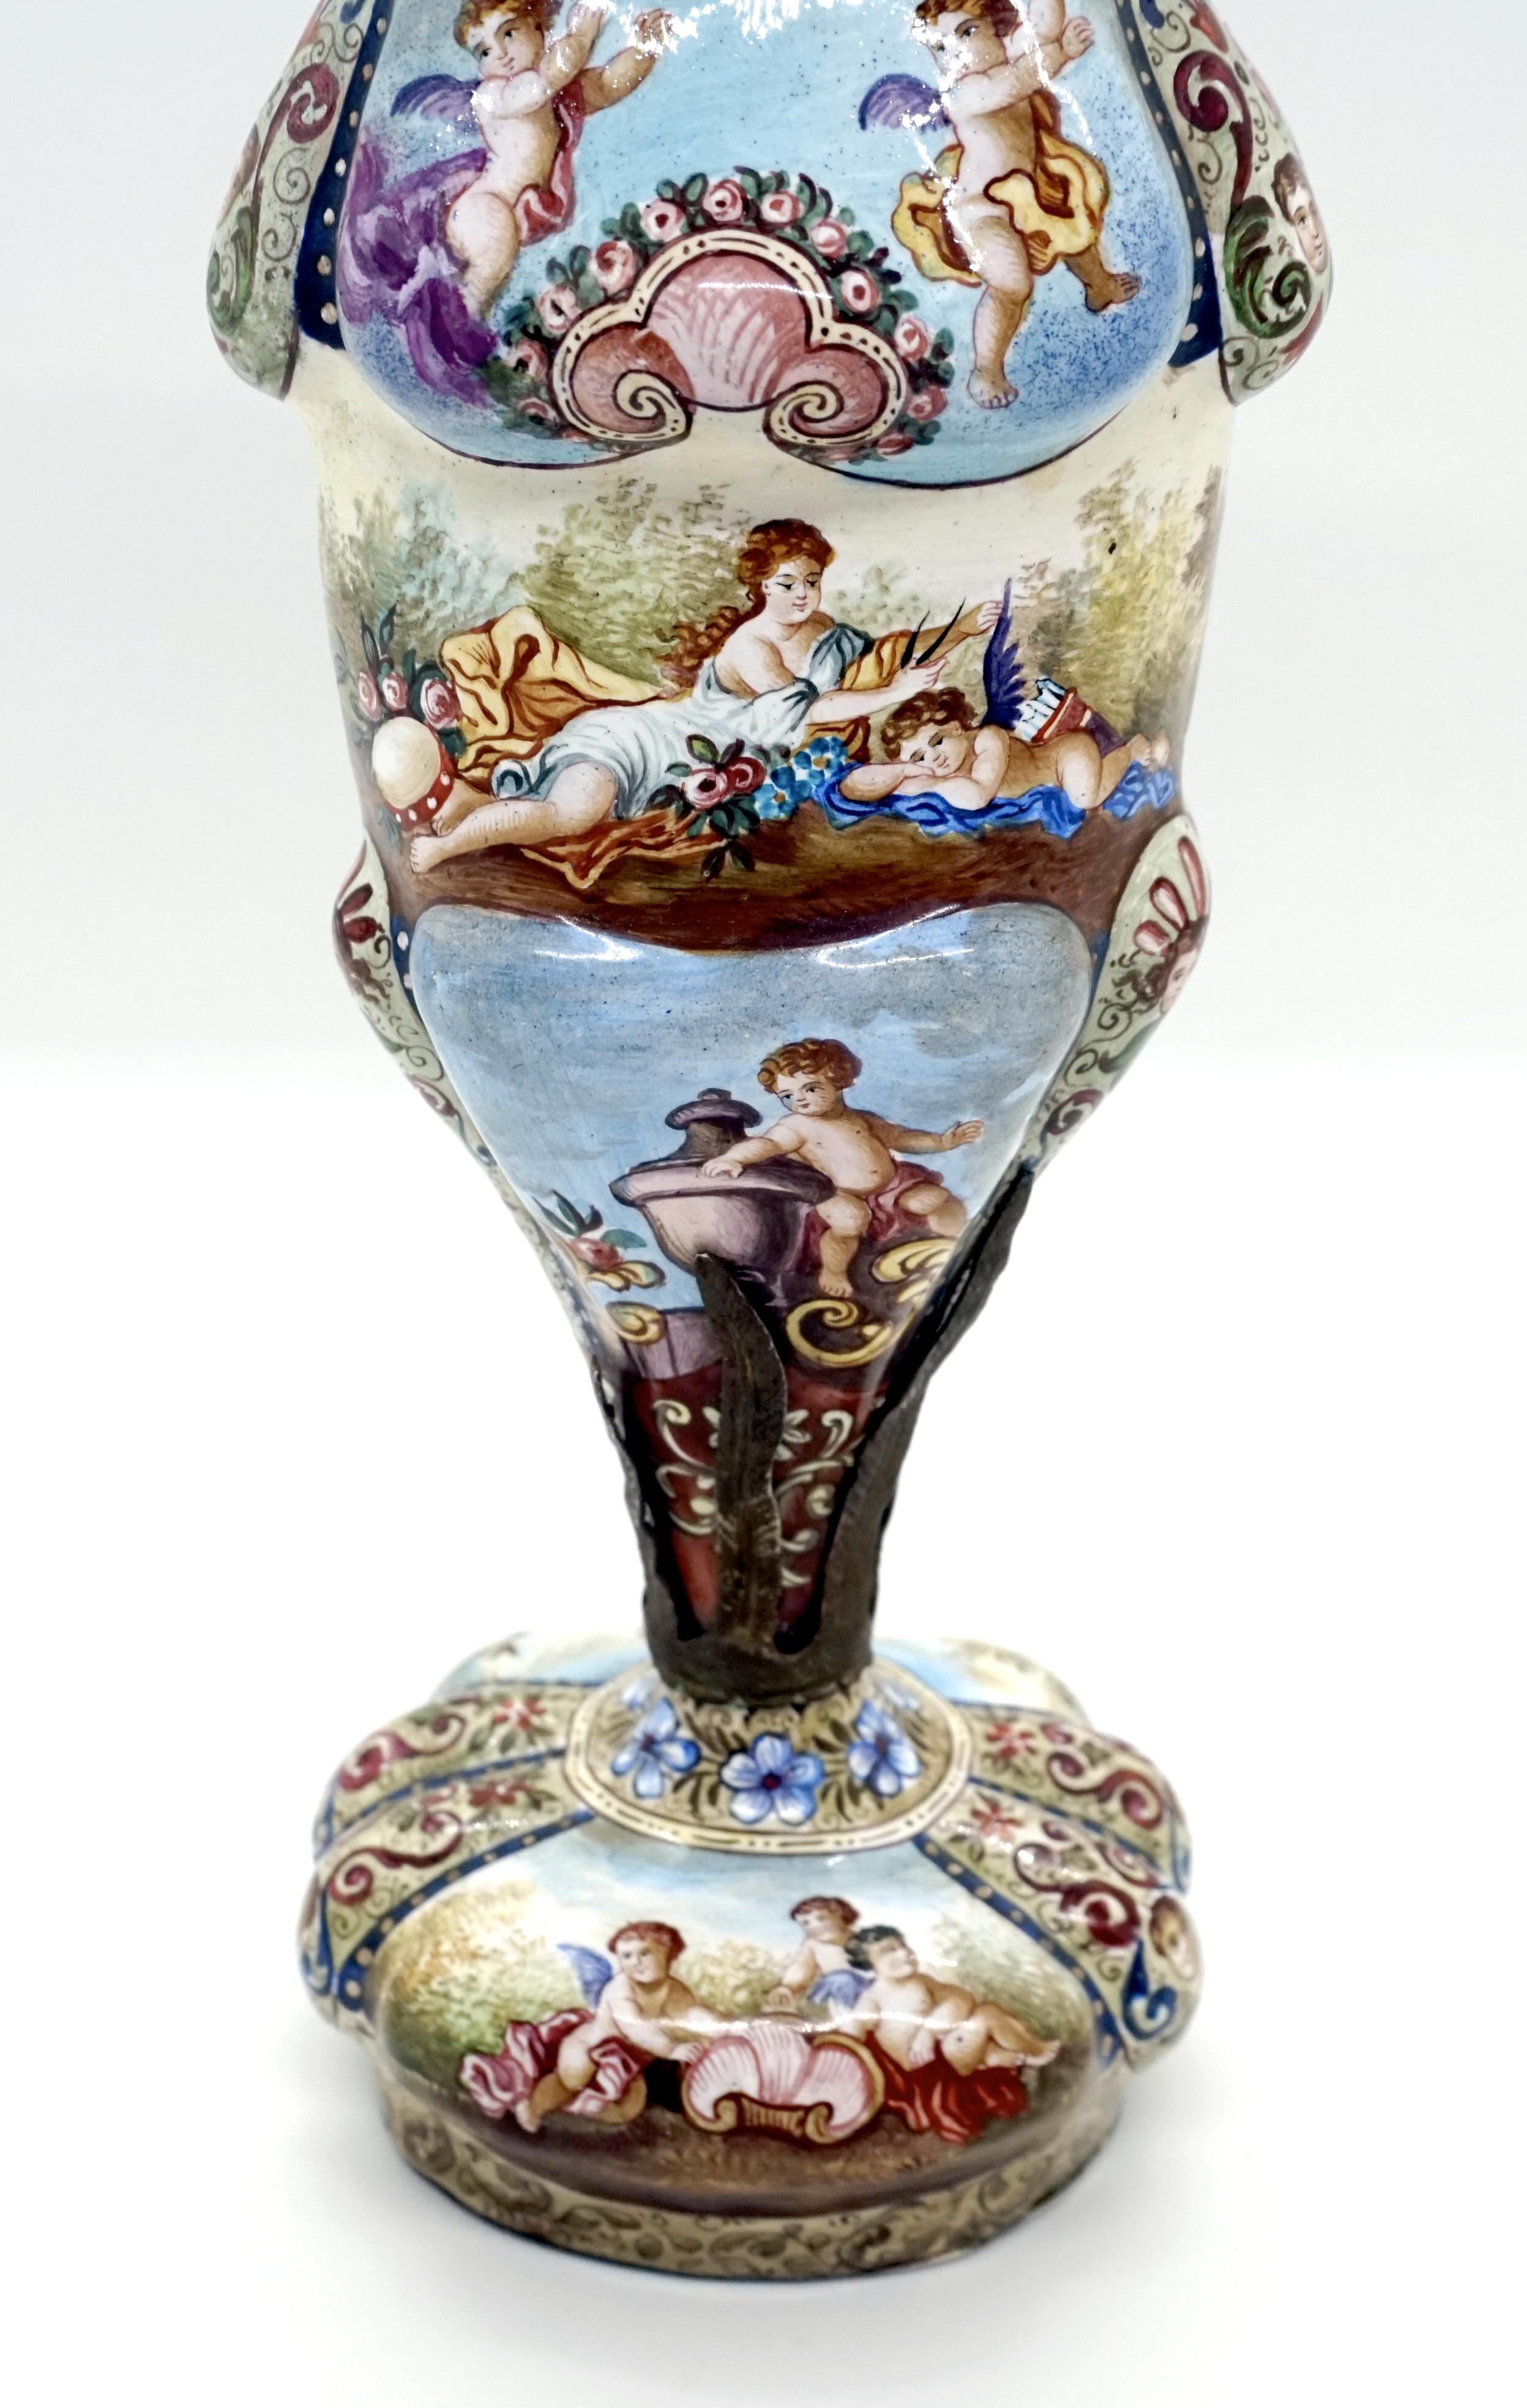 Mid-19th Century Finest 19th Century Viennese Enamel Amphora with Cupids and Antique Scenes